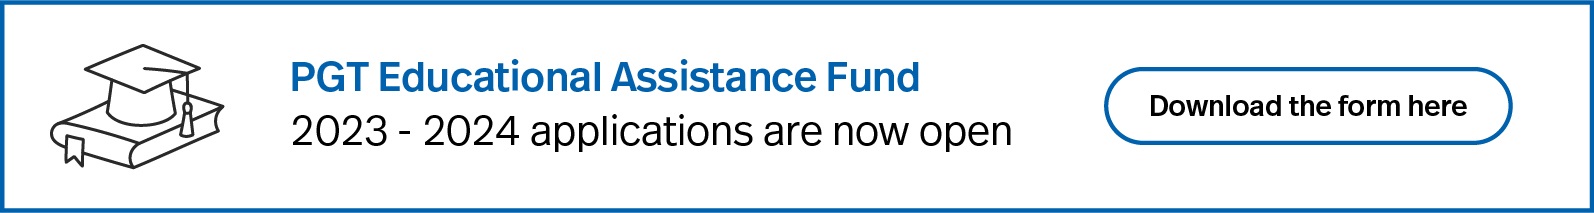 PGT Education Assistance Fund Application banner. Click here to access the forms.